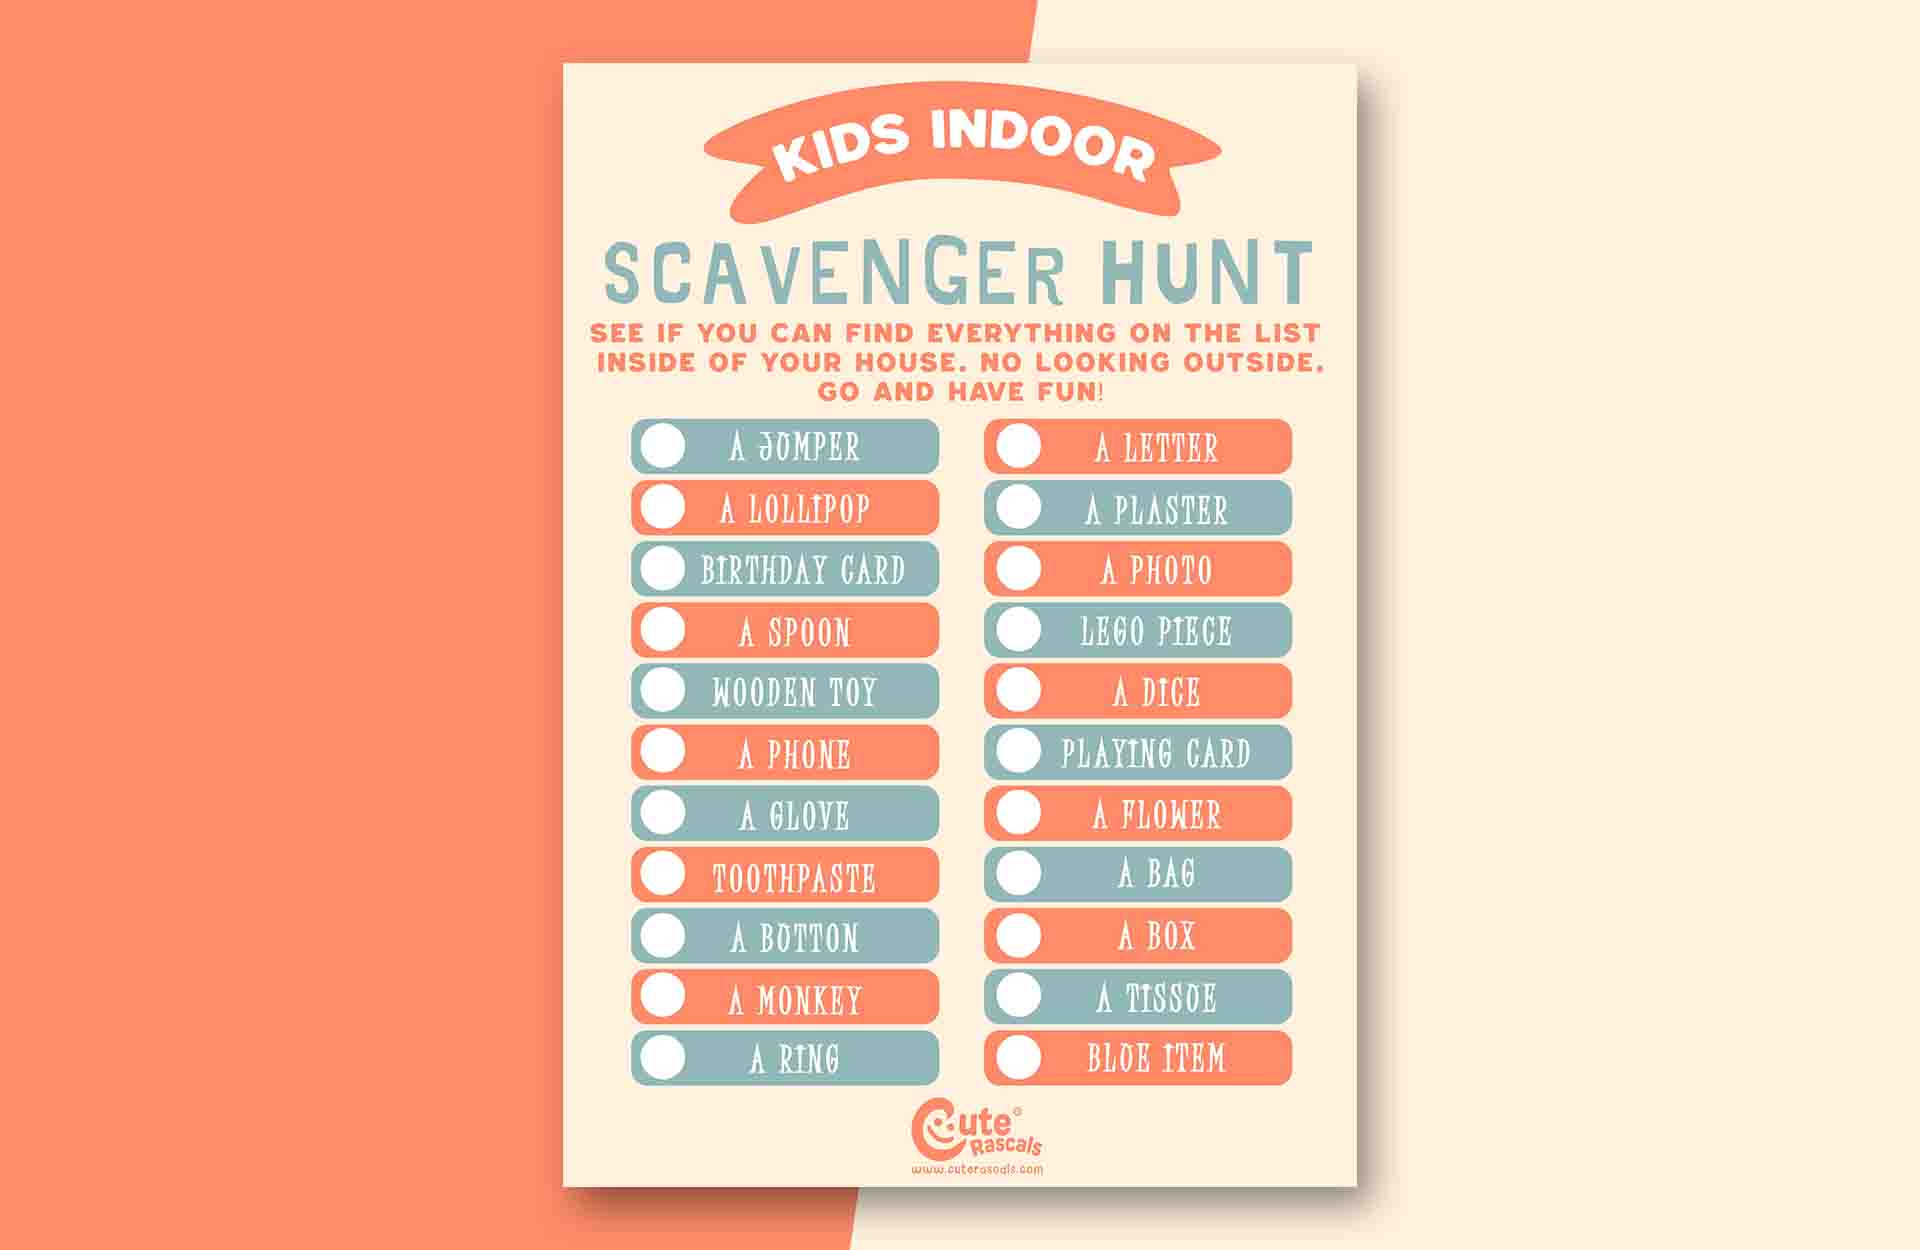 Indoor Scavenger Hunt For Kids To Enjoy Anytime Throughout The Day